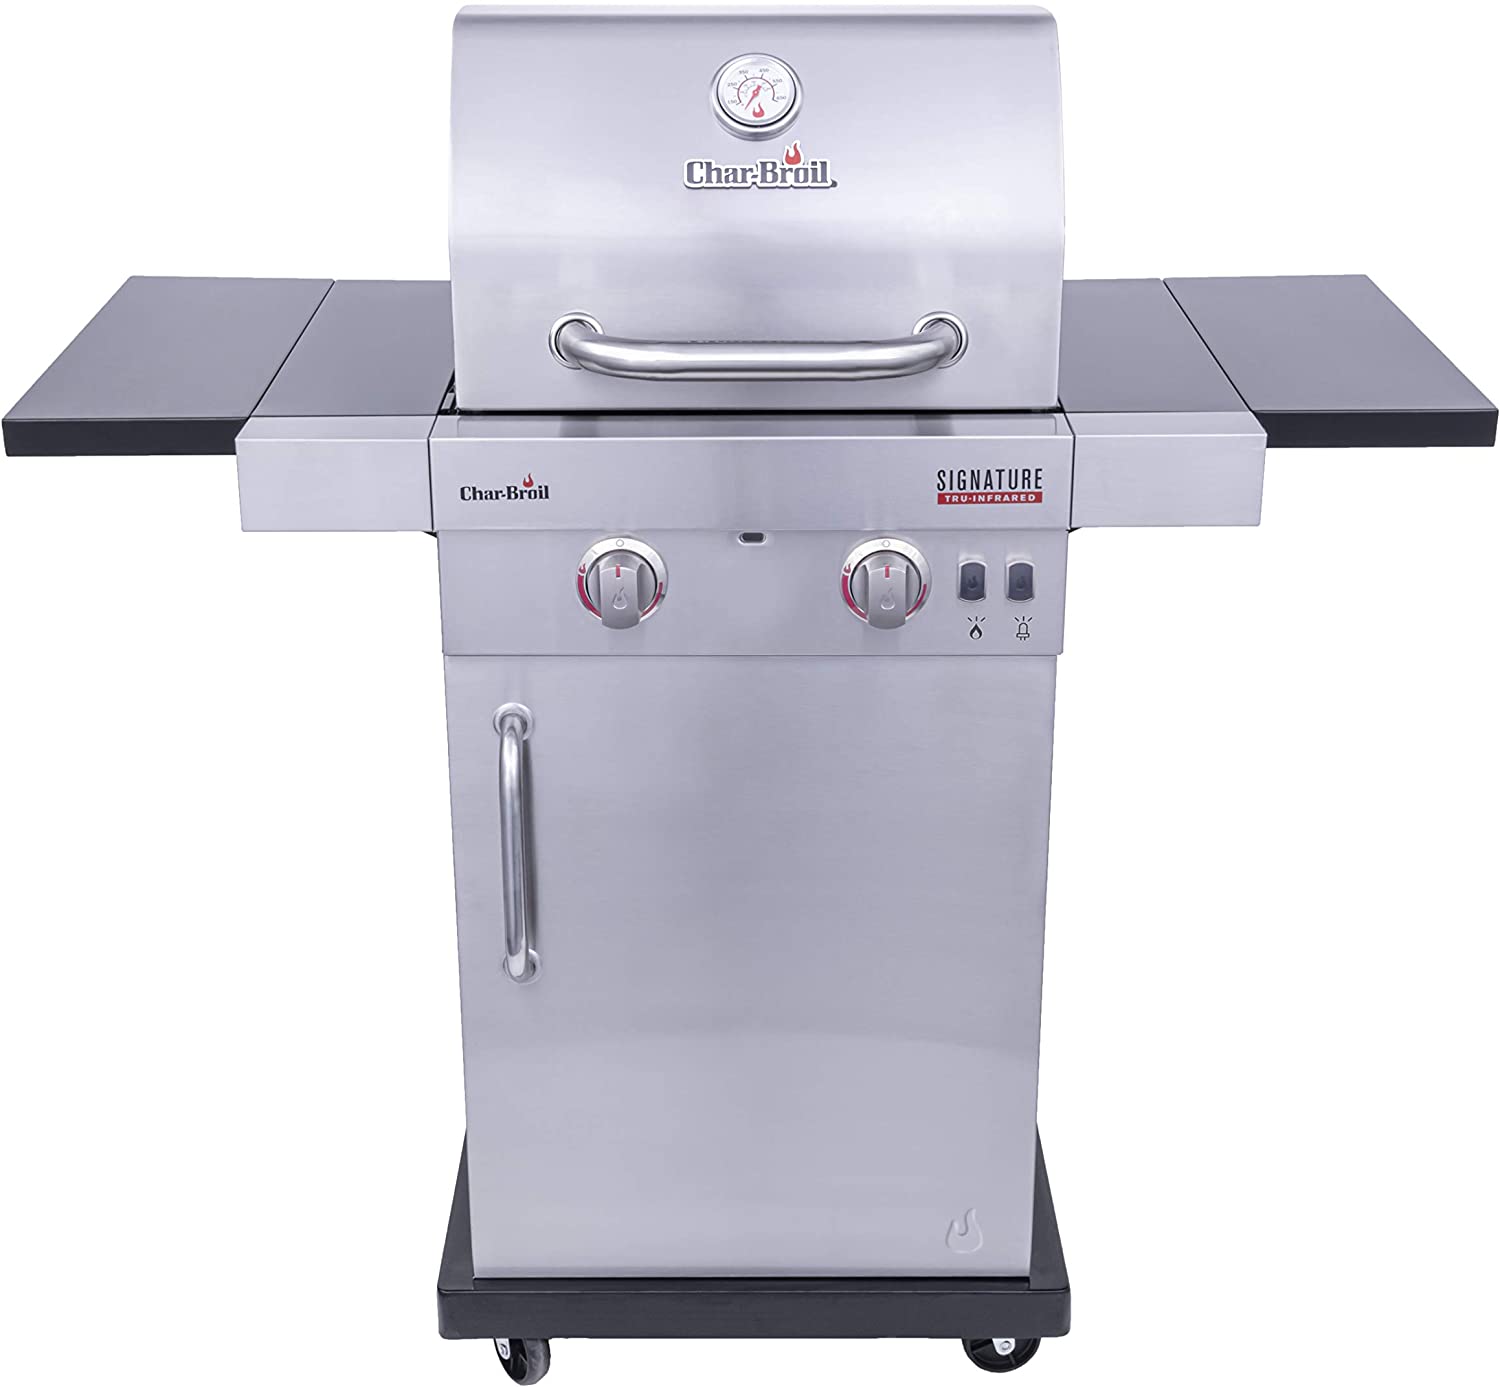 Char-Broil  Signature TRU Infrared 2-Burner Cabinet Style Gas Grill, Stainless Steel, 463632520 